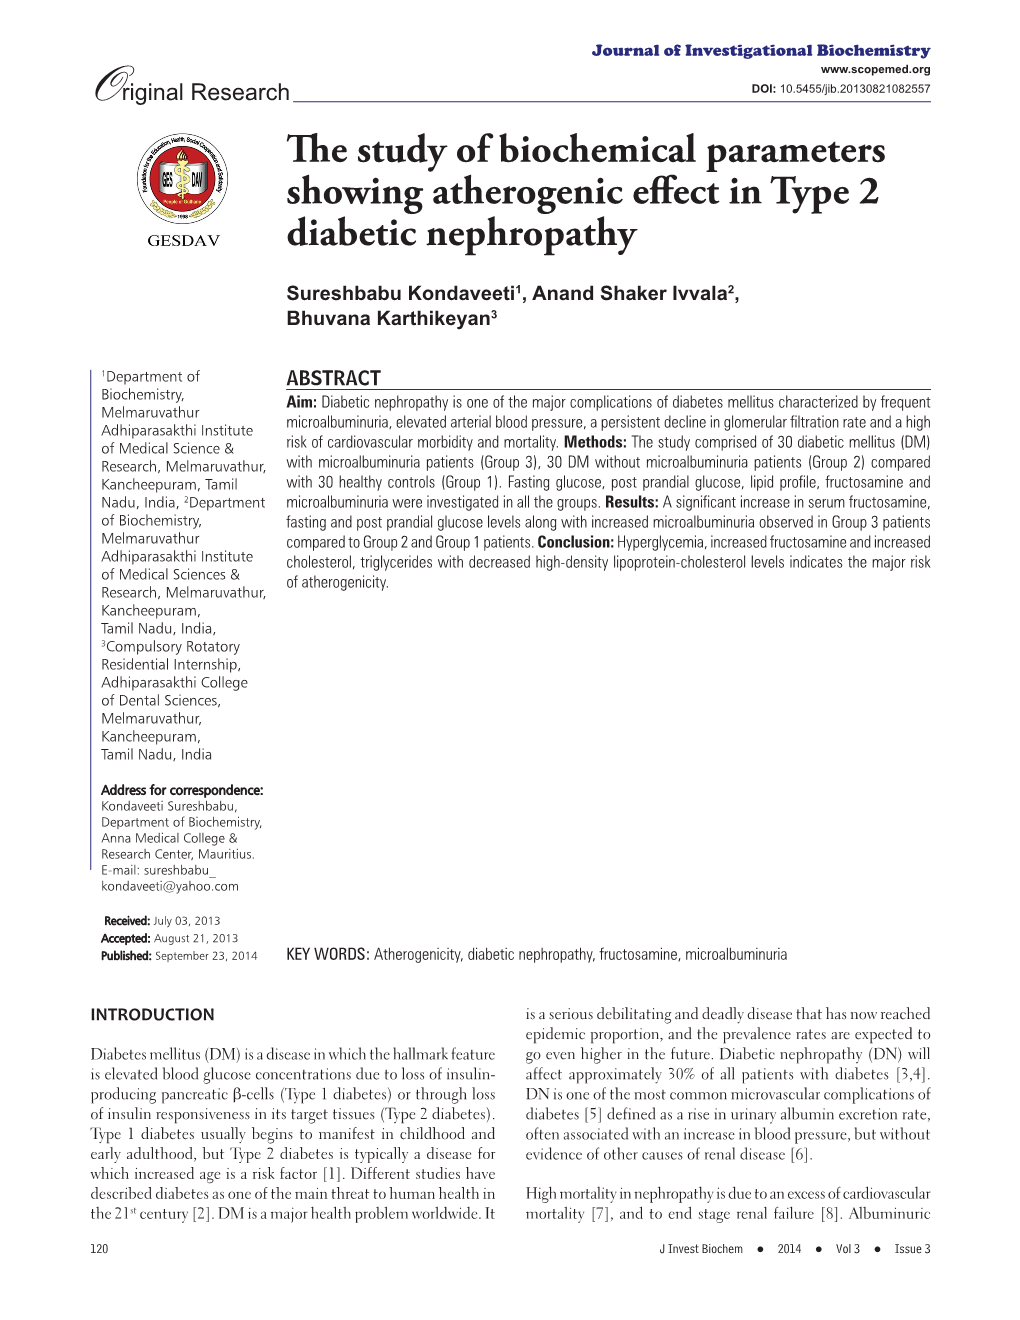 The Study of Biochemical Parameters Showing Atherogenic Effect in Type